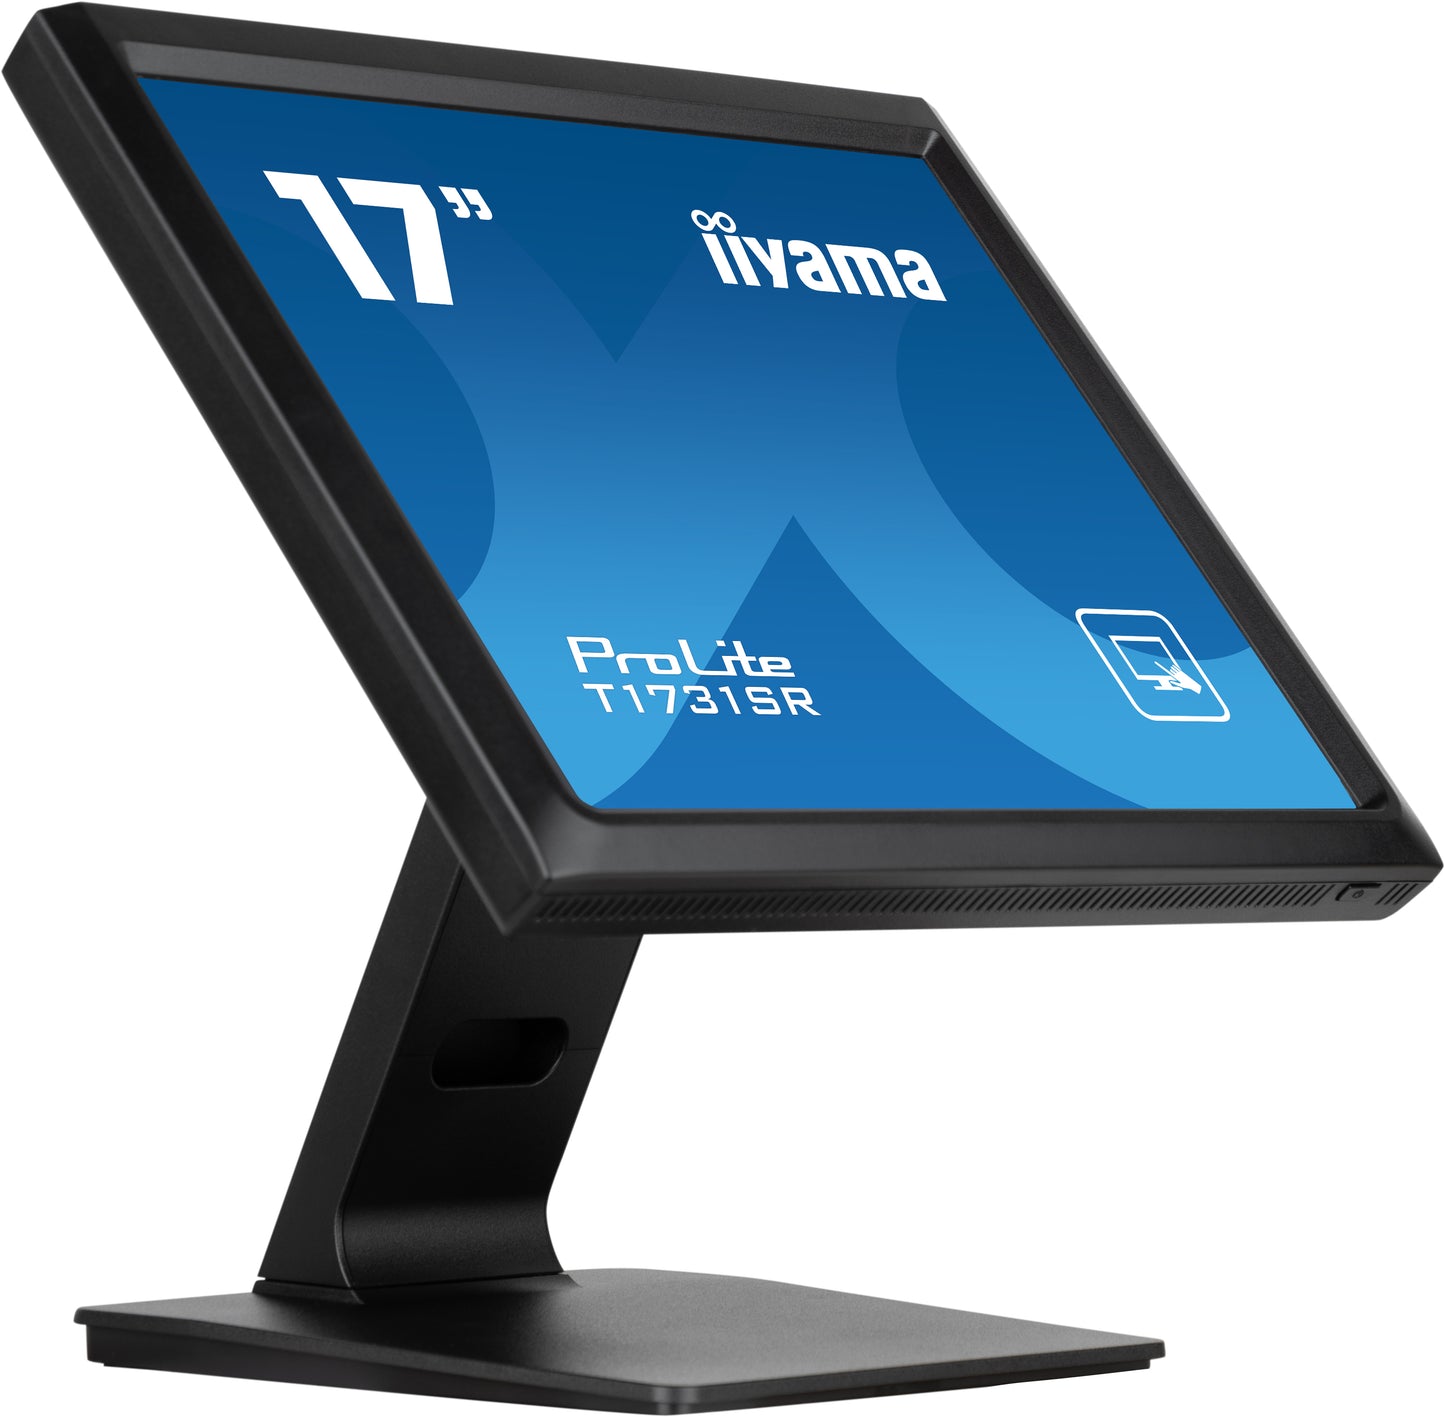 iiyama ProLite T1731SR-B1S 17” Touchscreen with 5-wire Resistive Touch Technology